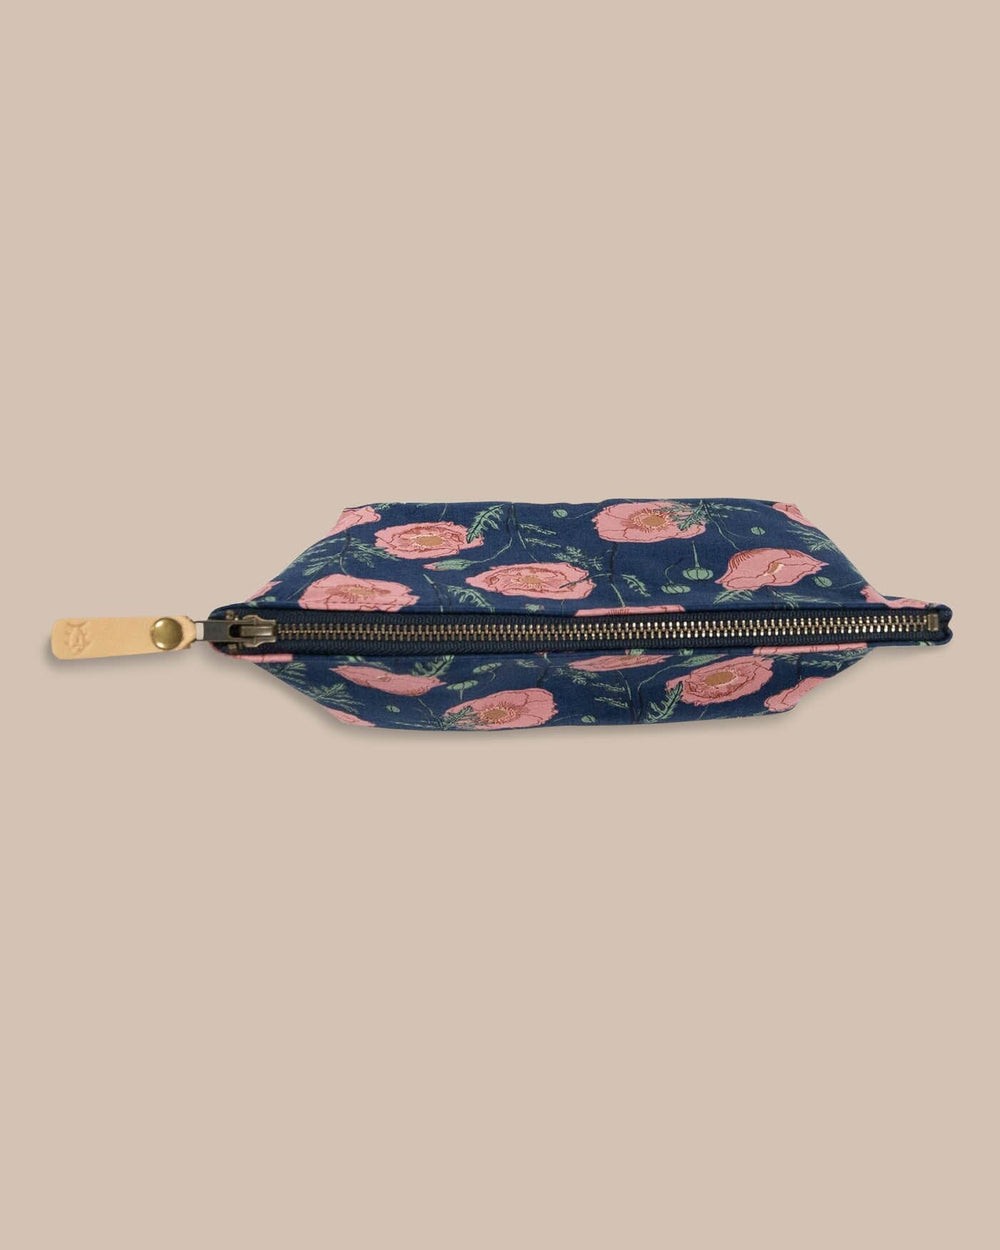 The top view of the Southern Tide Floral Travel Clutch by Southern Tide - Navy